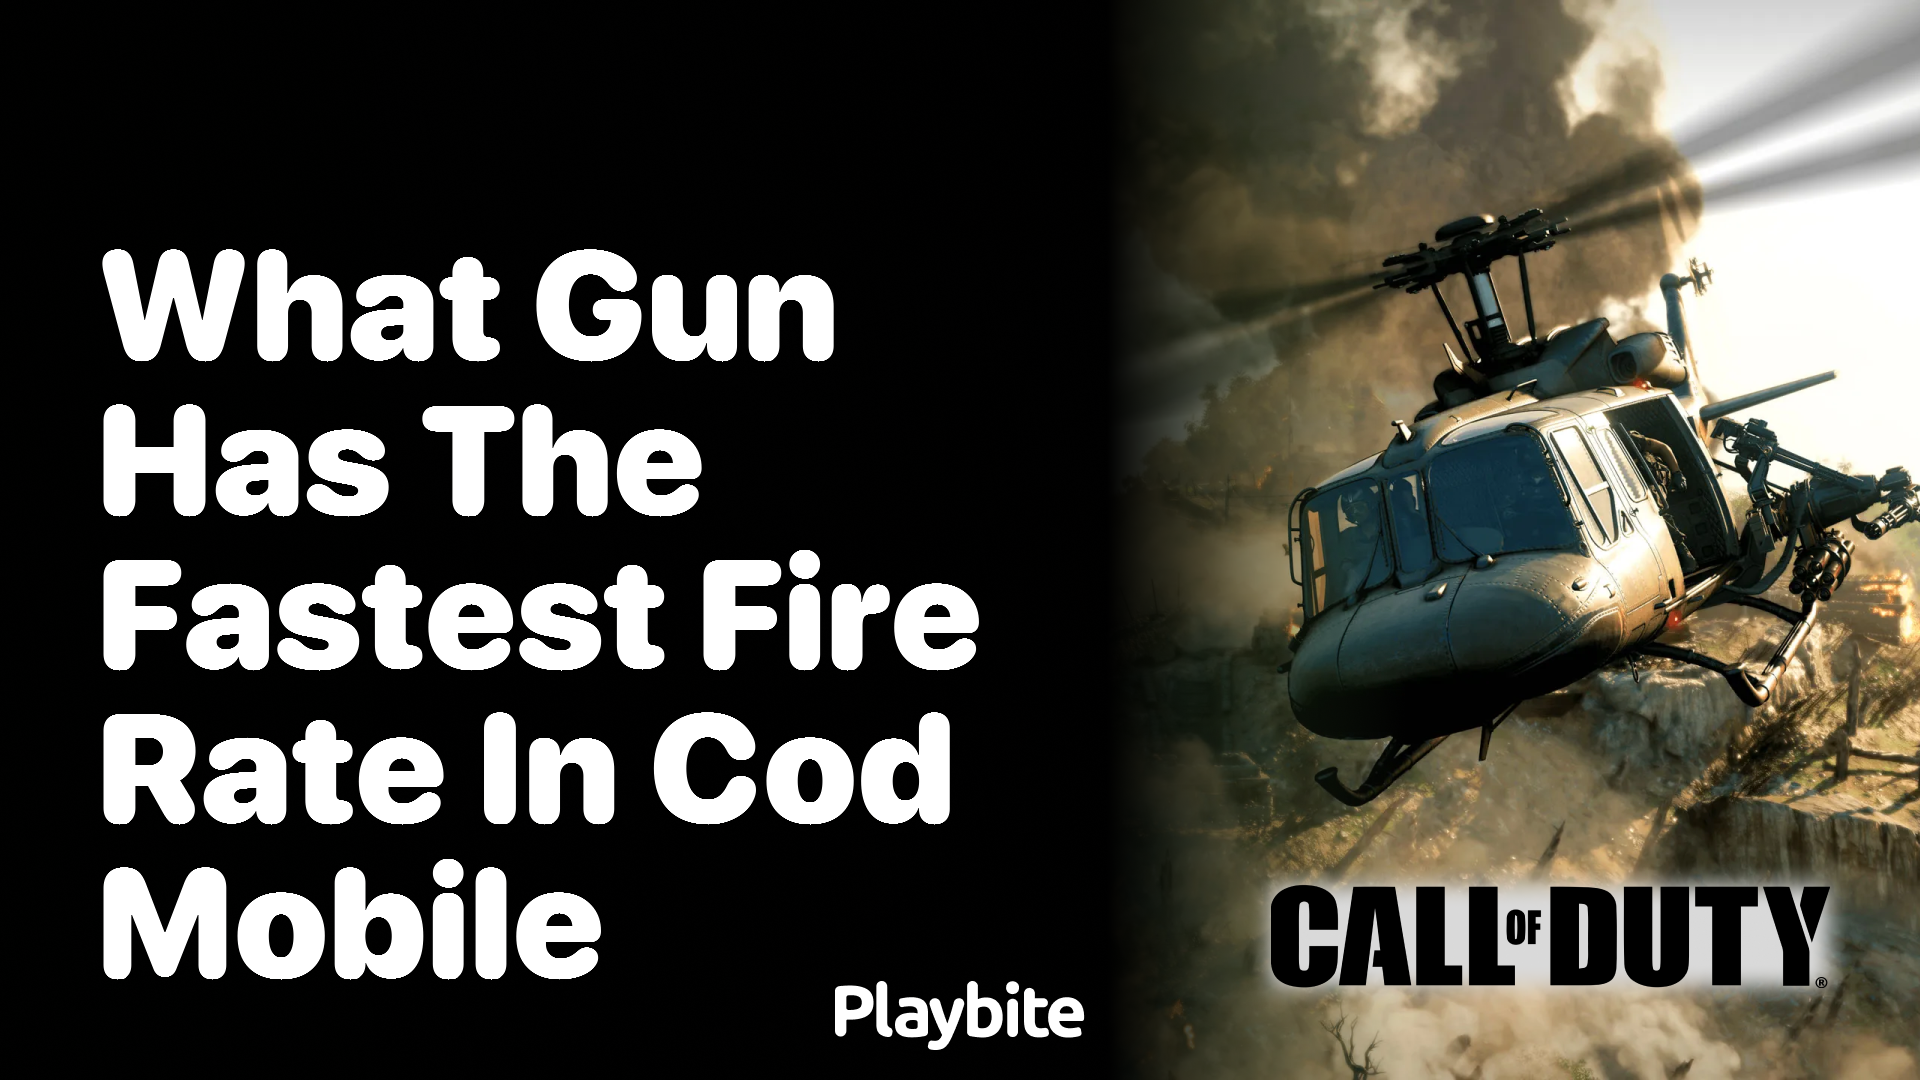 What Gun Has the Fastest Fire Rate in COD Mobile?